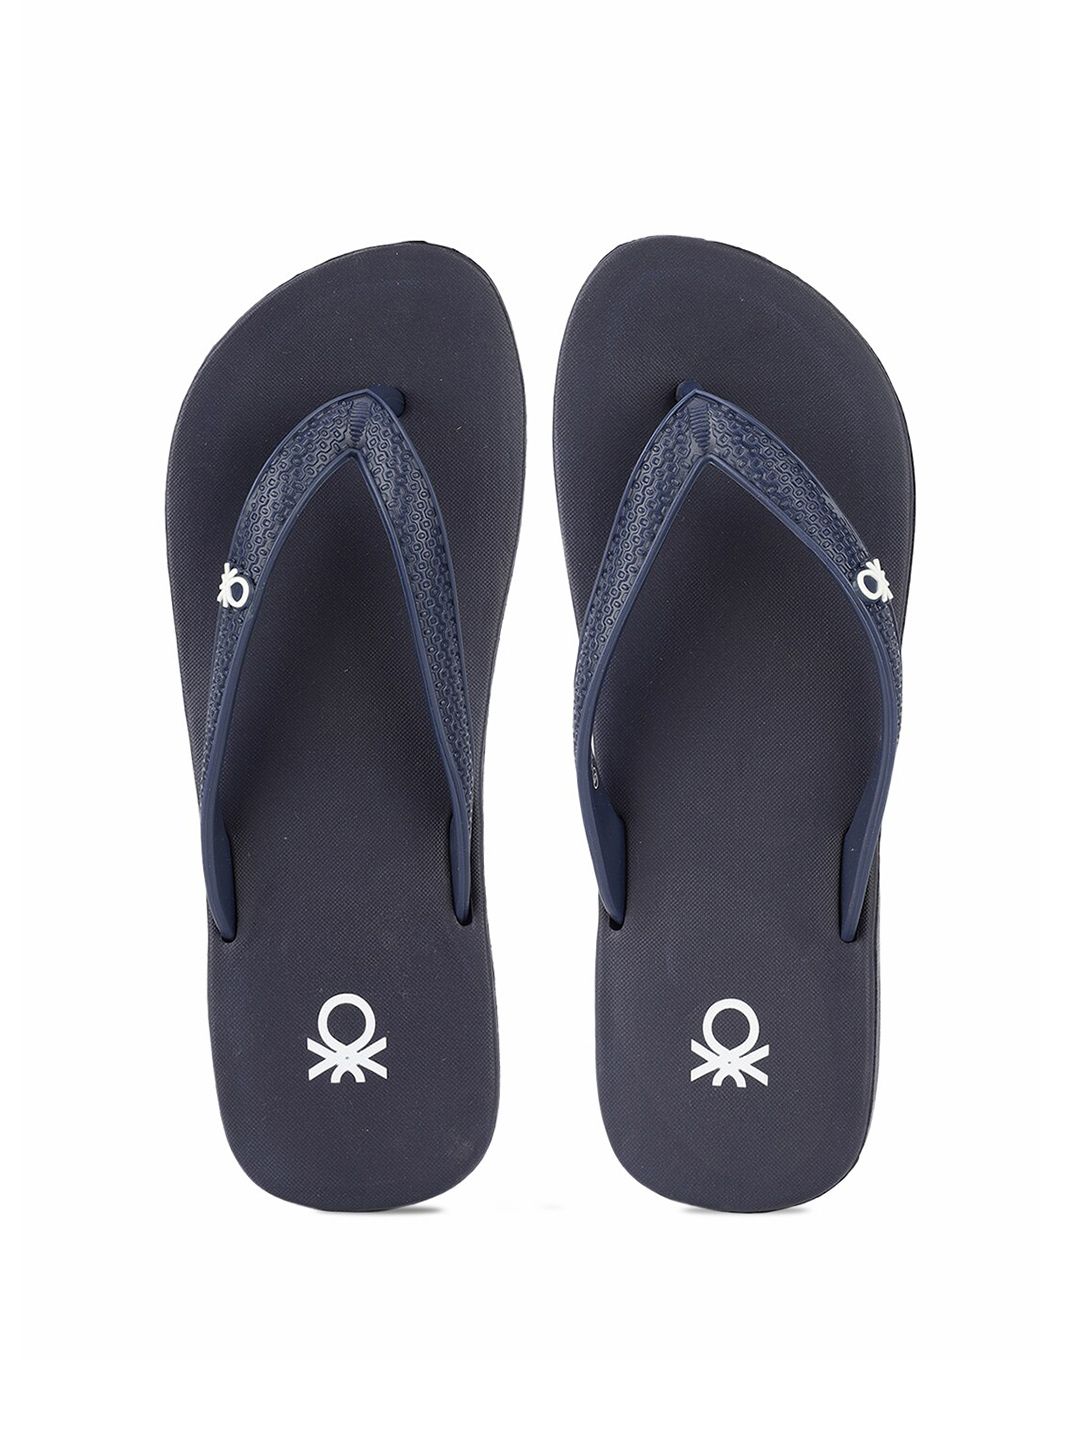 United Colors of Benetton Women Navy Blue Printed Rubber Thong Flip-Flops Price in India